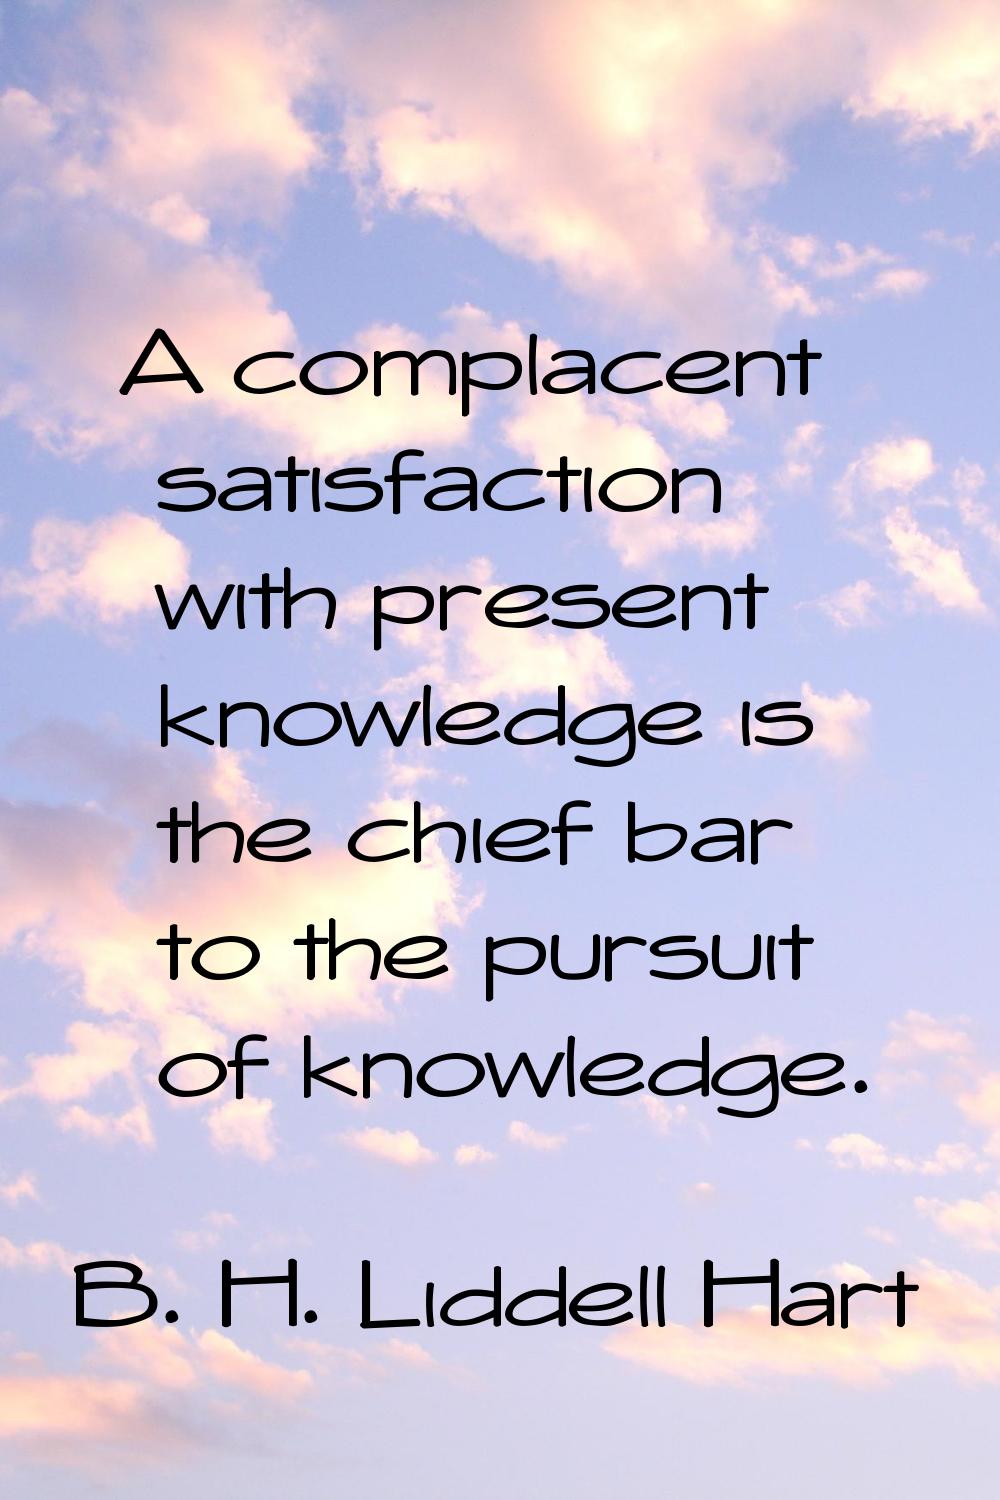 A complacent satisfaction with present knowledge is the chief bar to the pursuit of knowledge.